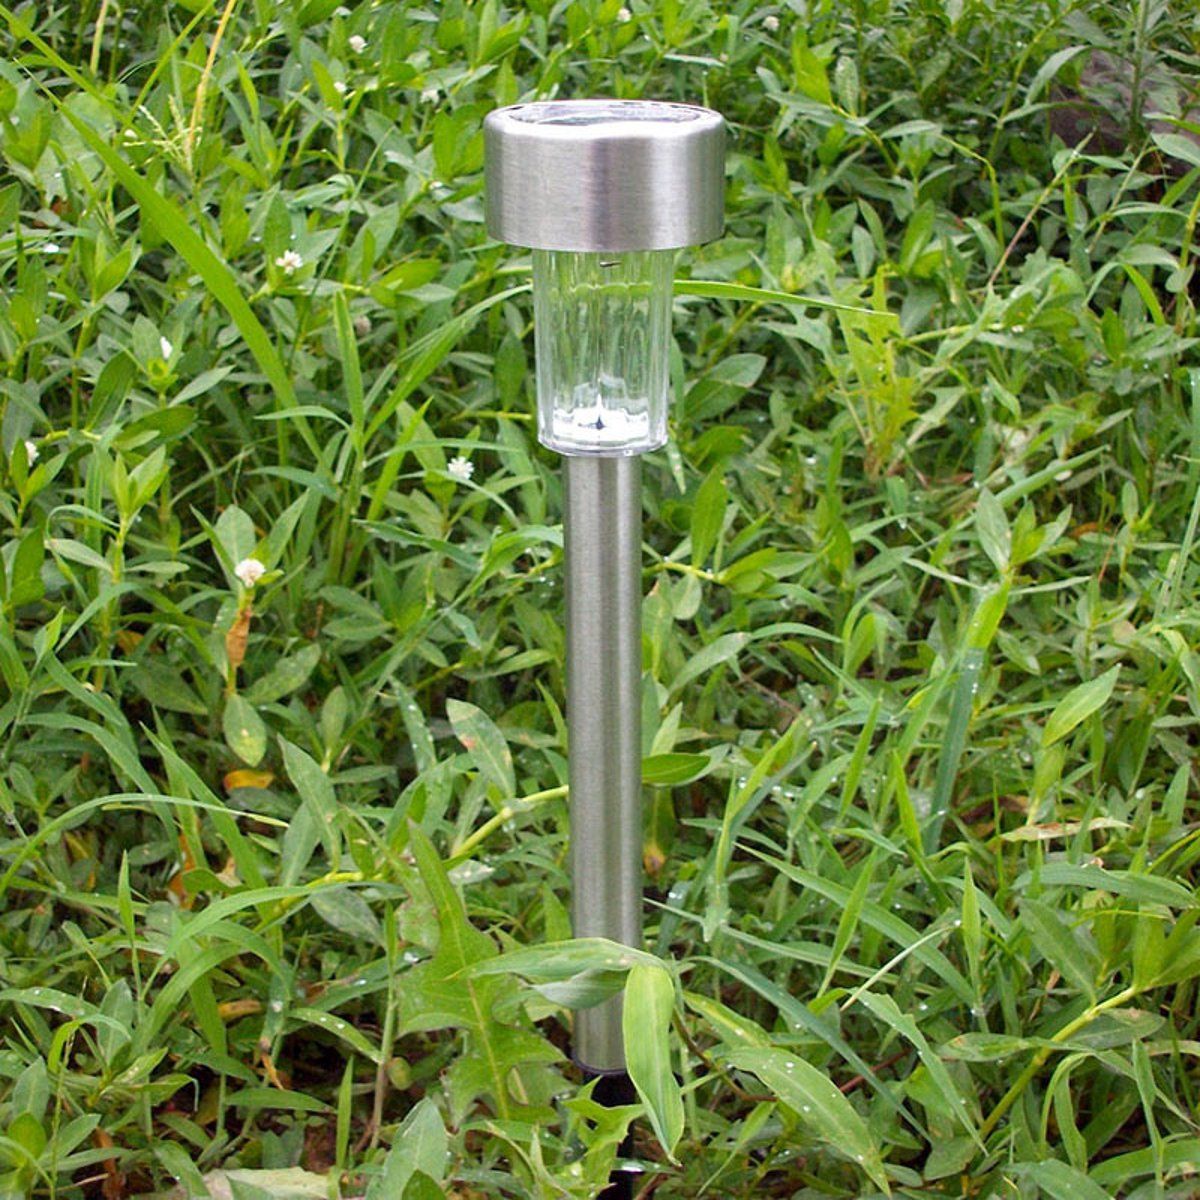 Solar-Powered-LED-Lawn-Light-Post-Stake-Patio-Outdoor-Stainless-Steel-Garden-Lamp-1706586